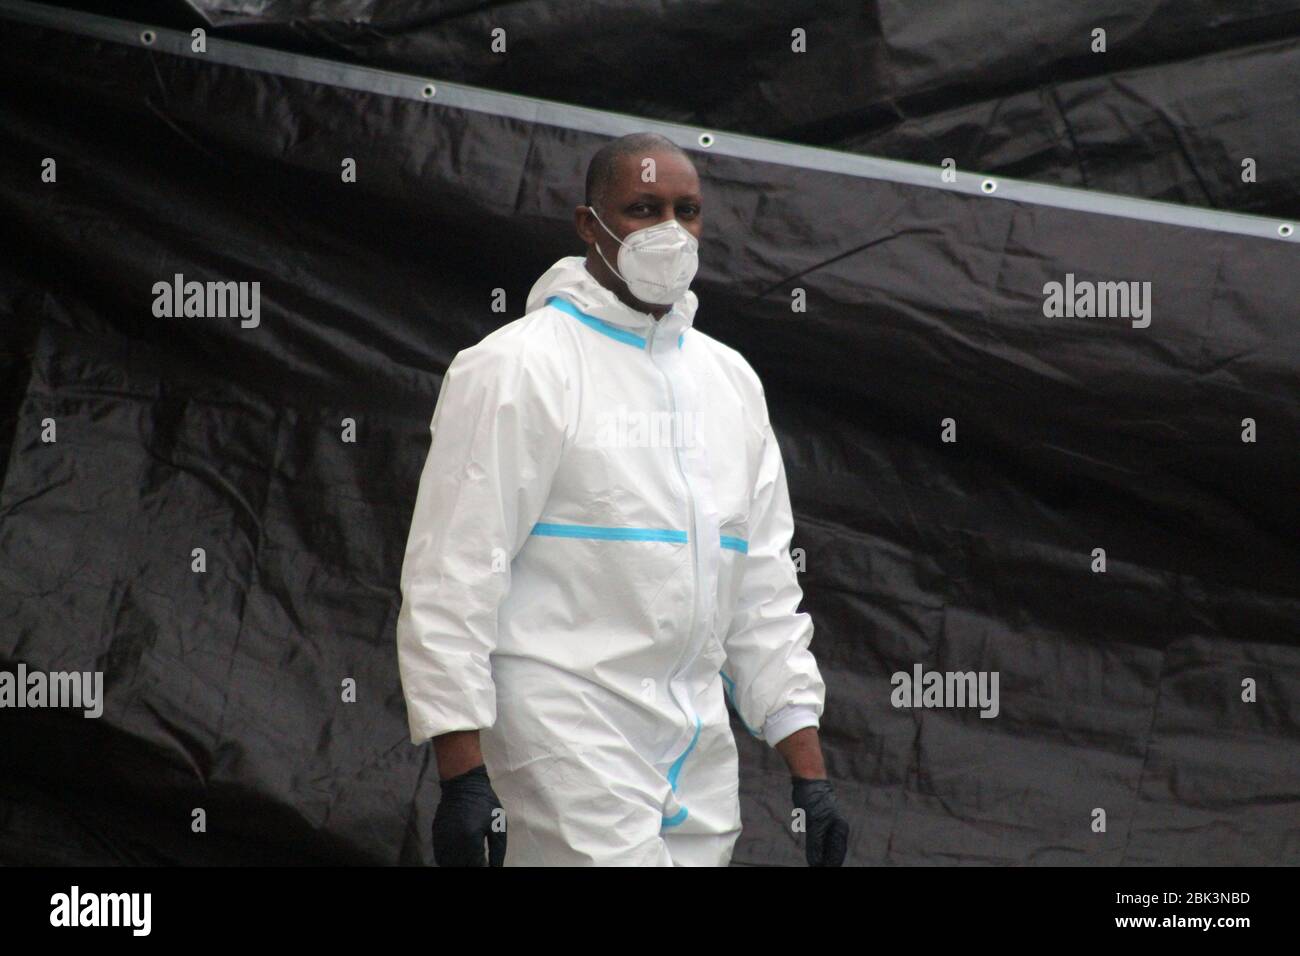 New York, New York, USA. 30th Apr, 2020. A worker, dressed in a hazmat and masked face, goes along a brown tarp set up in front of the Andrew T. Cleckley Funeral Home in Brooklyn where bodies non properly cared are removed. 60 corpses were stored in 4 rented vehiciles lining the street along stores. Neighbors reported a foul smell and fluids dripping from the trucks. Some remains were also found lying on the facilityÃ¢â‚¬â„¢s floor. In New York City alone, there have been almost 13,000 COVID-19 deaths. Credit: Marie Le Ble/ZUMA Wire/Alamy Live News Stock Photo